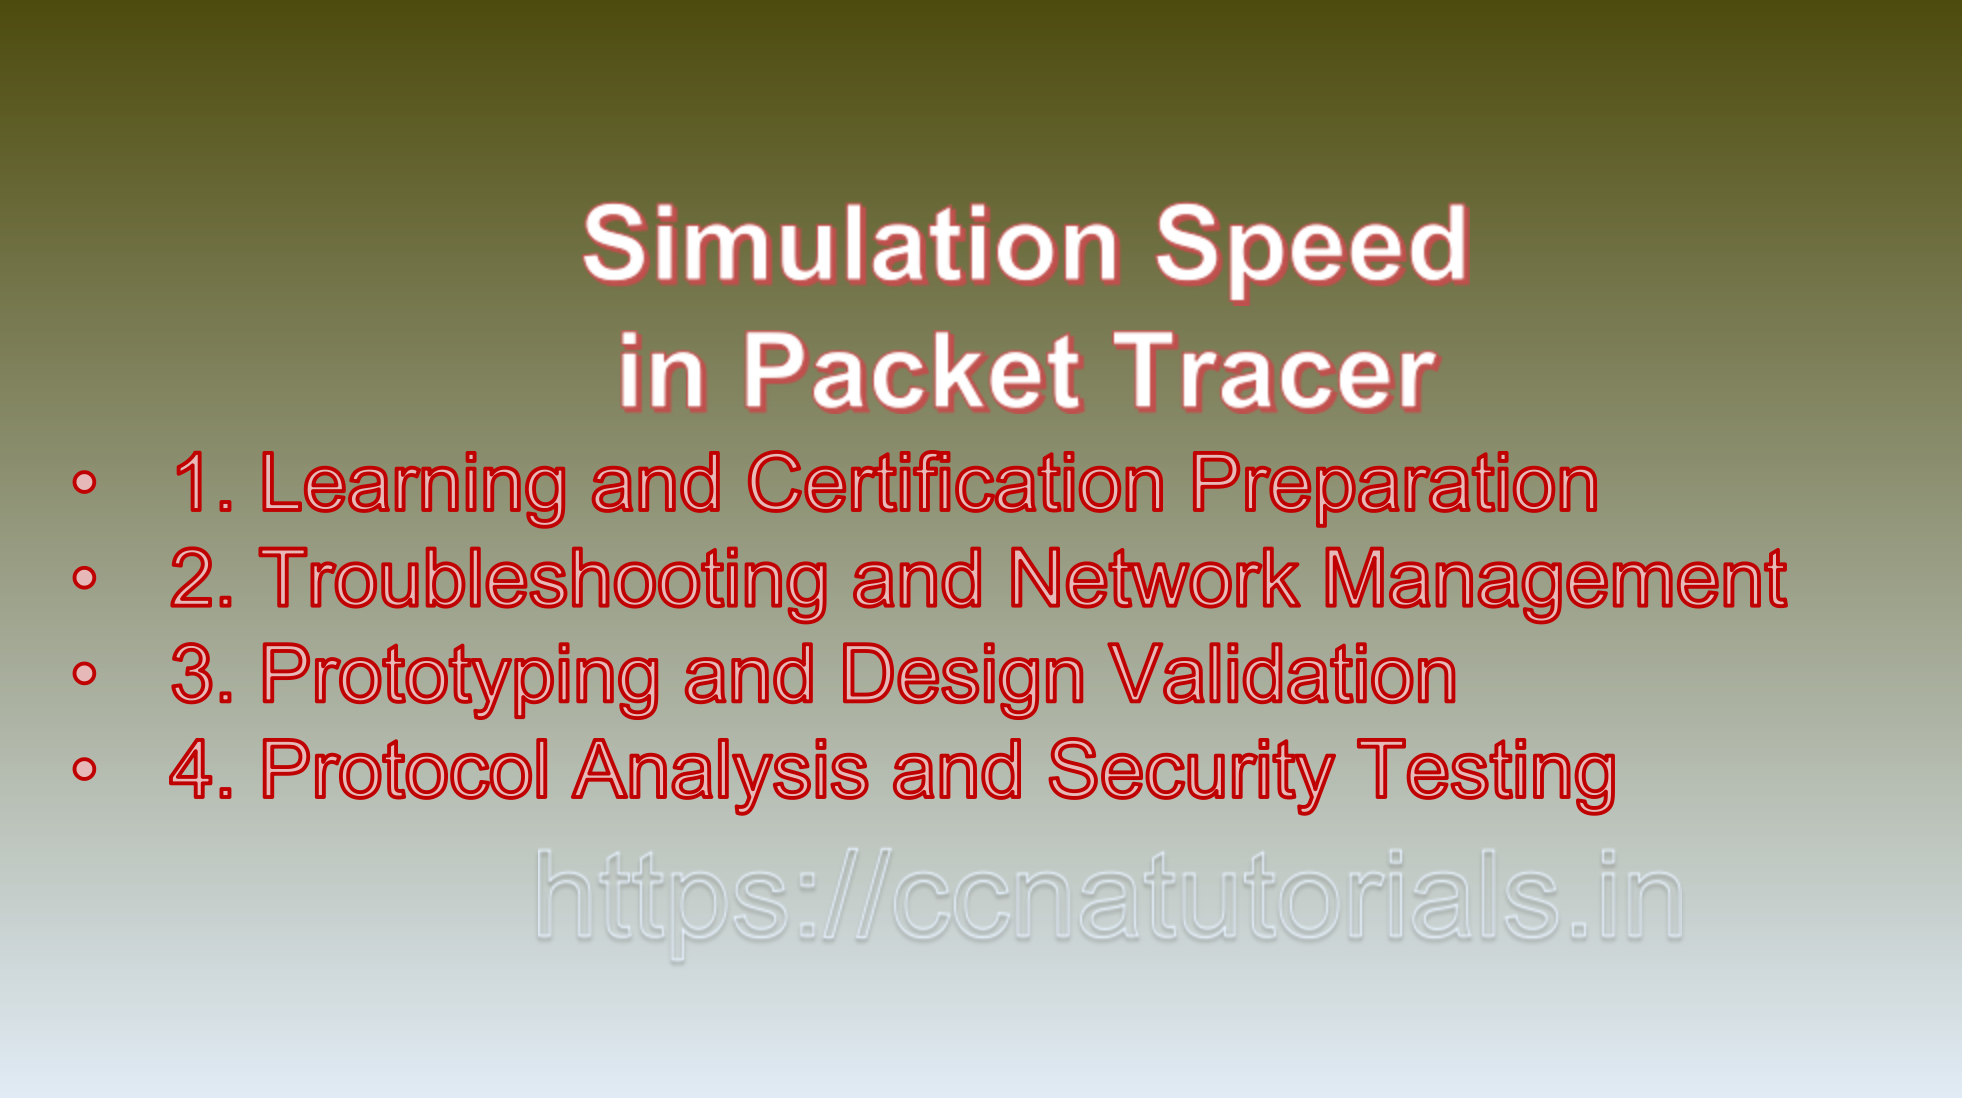 Simulation Speed in Packet Tracer, ccna, ccna tutorials